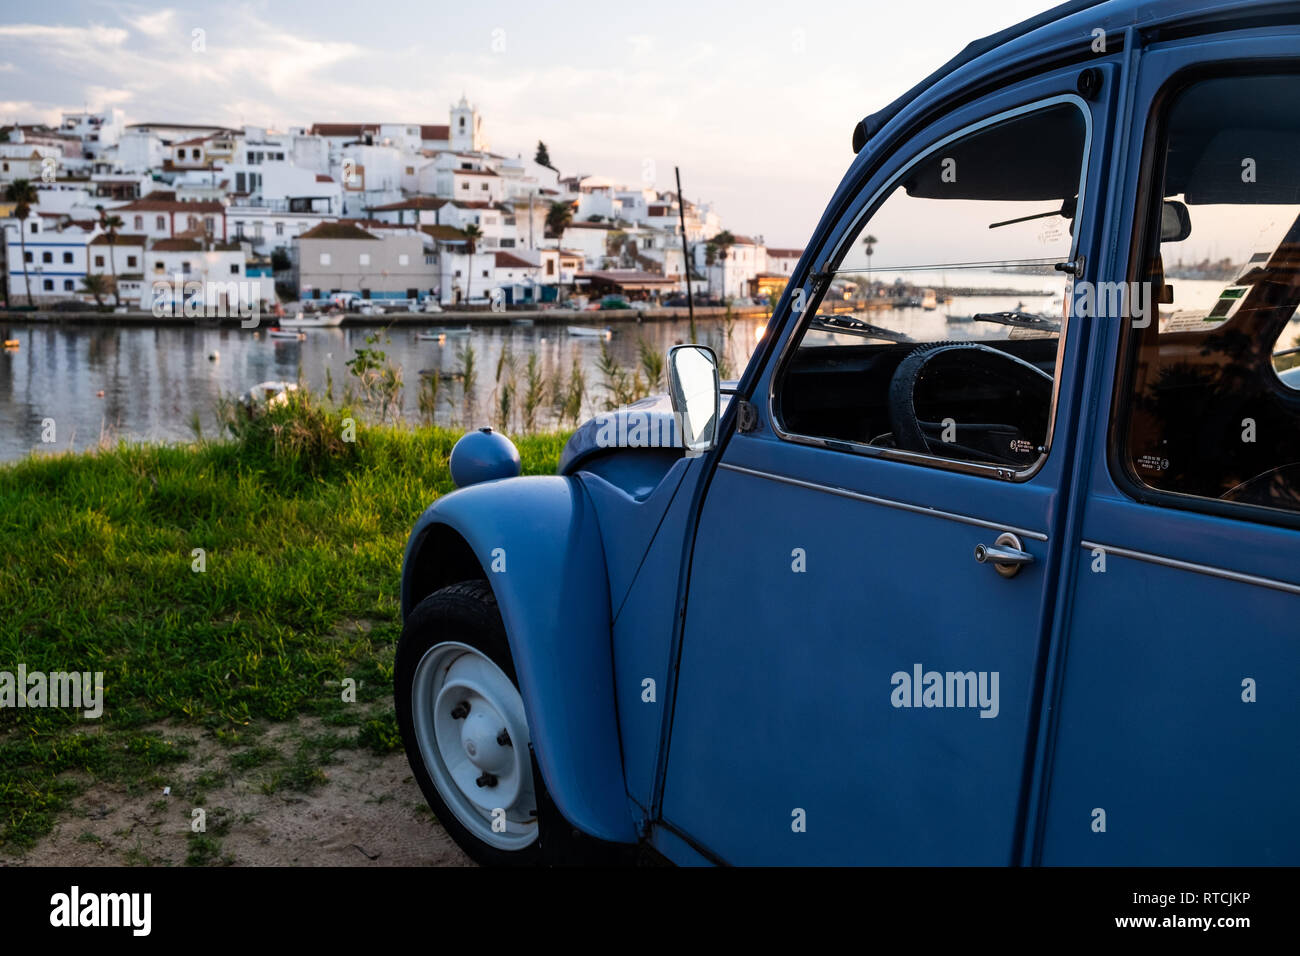 Old 2CV in front of an old city Stock Photo